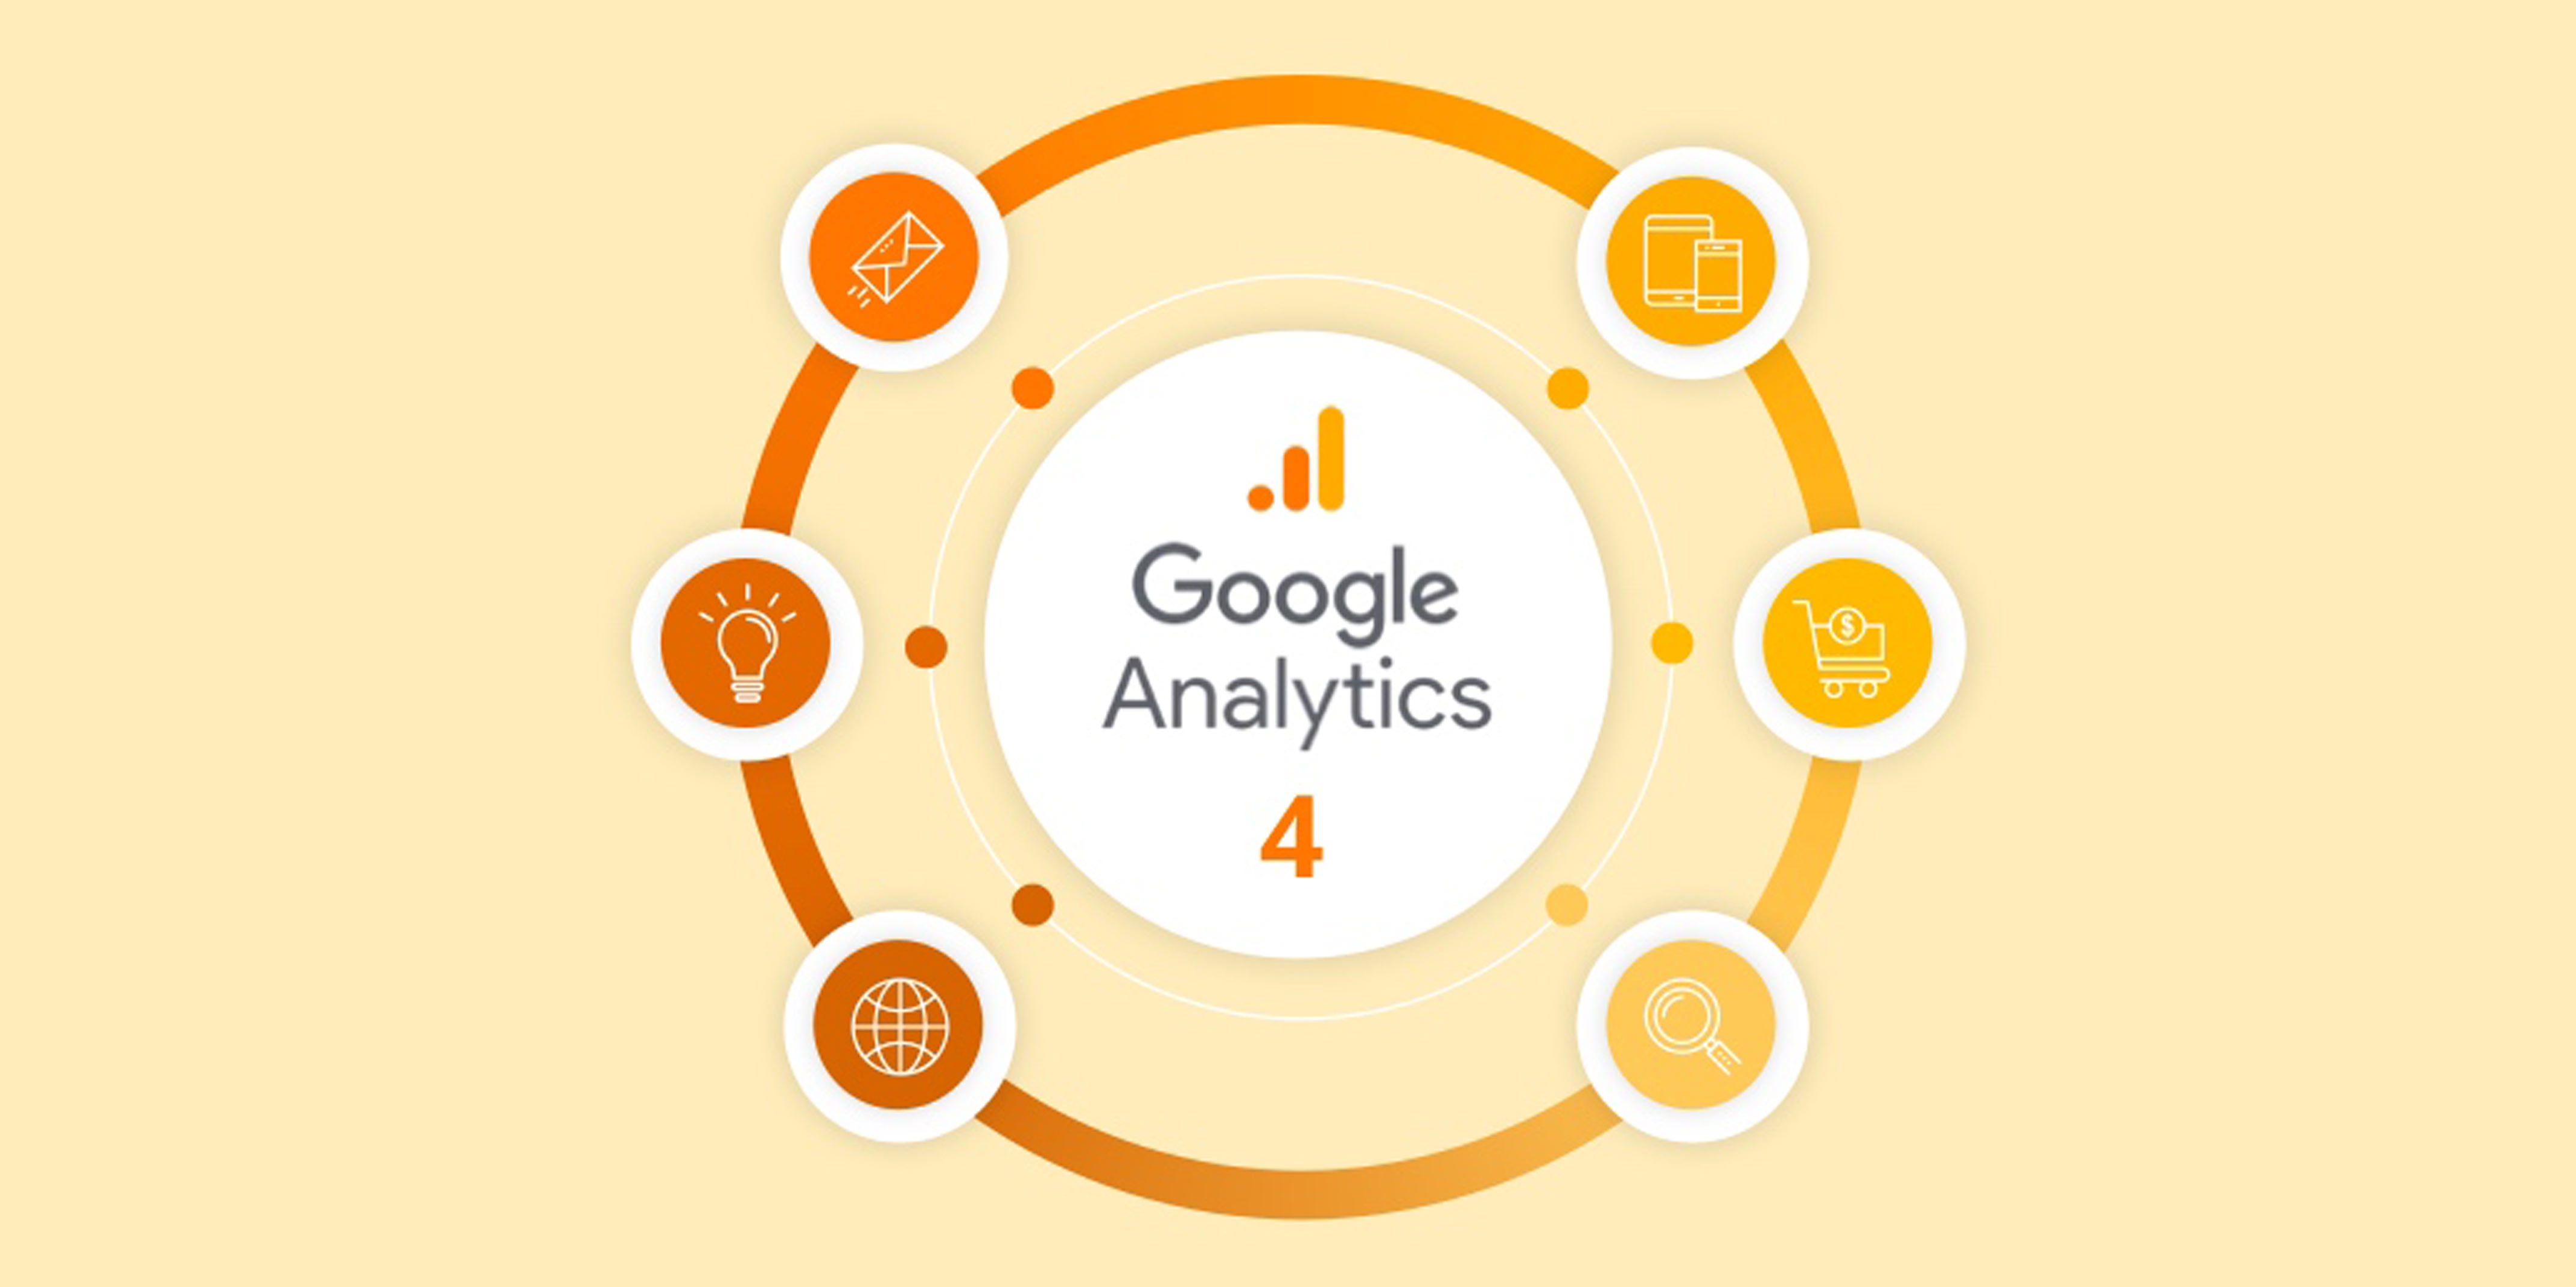 A guide to google analytics 4